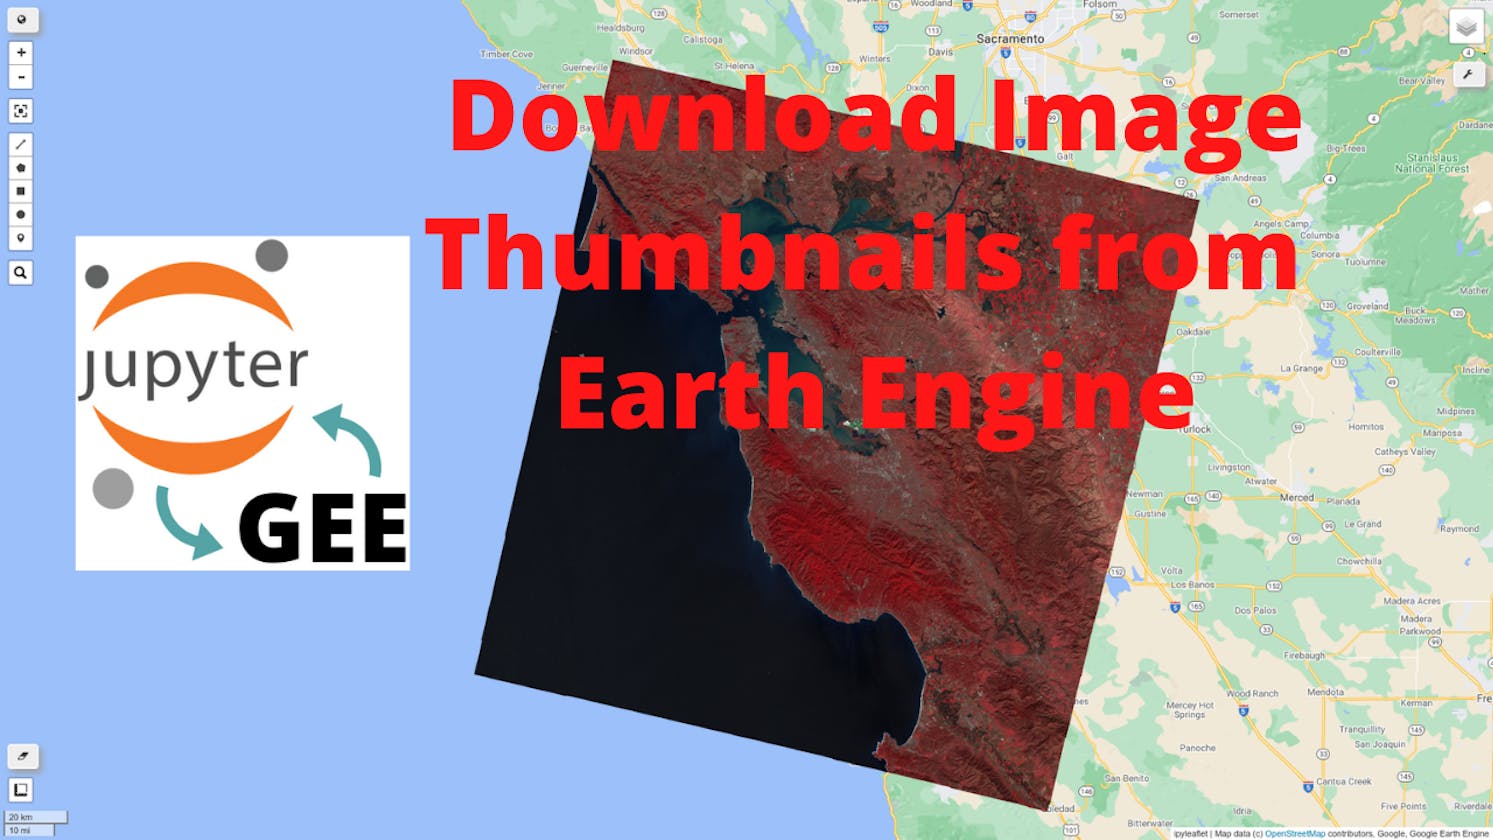 GEE Tutorial #47 - How to download image thumbnails from GEE